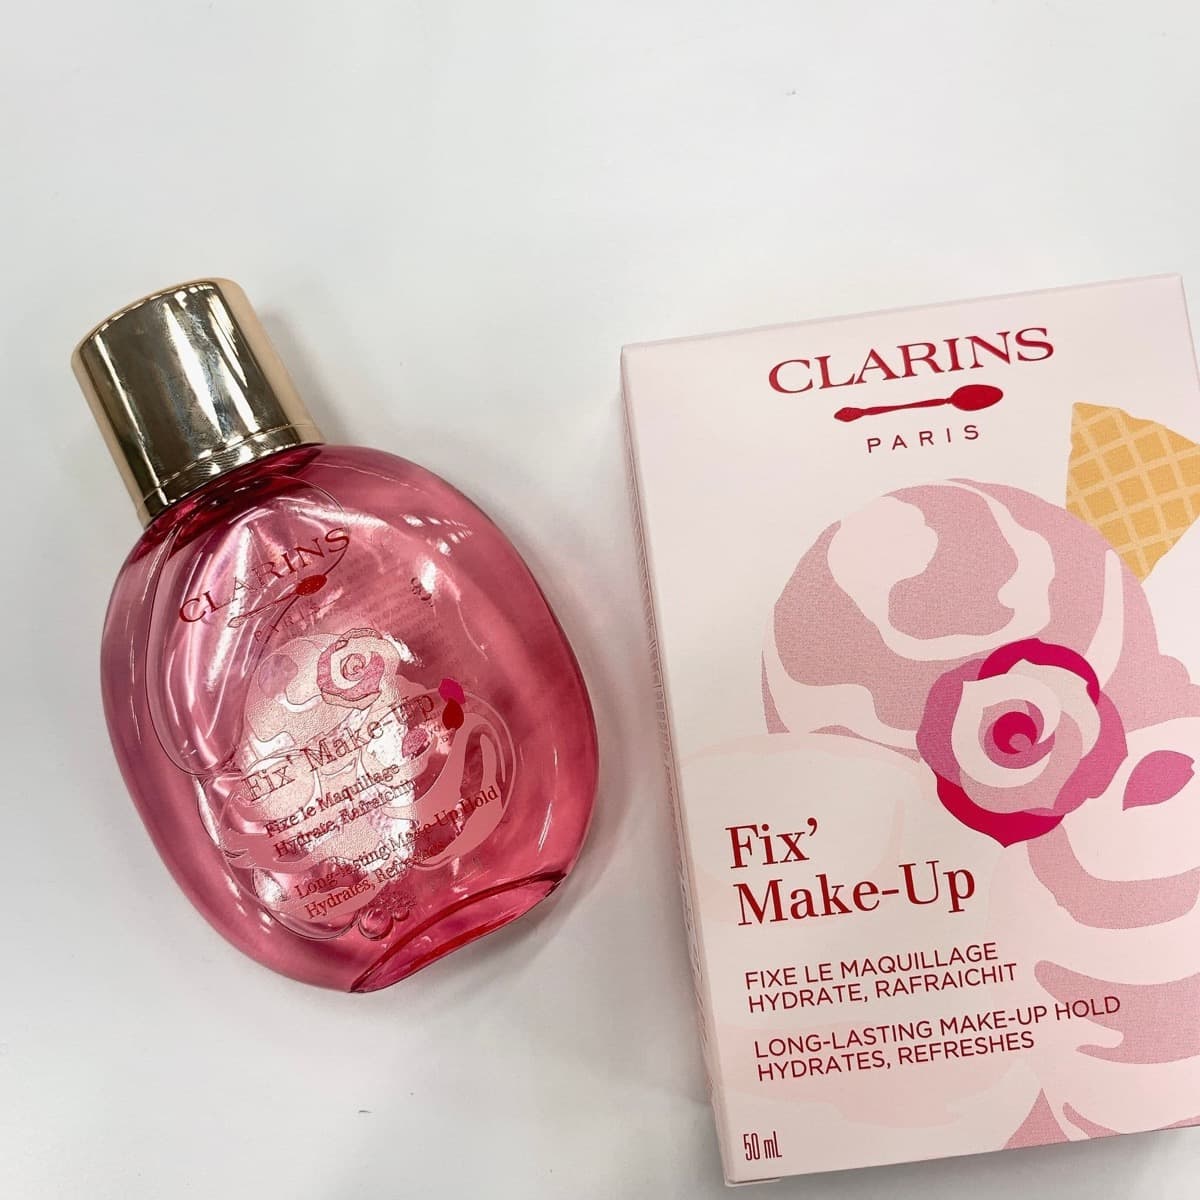 Clarins makeup collection Patisserie